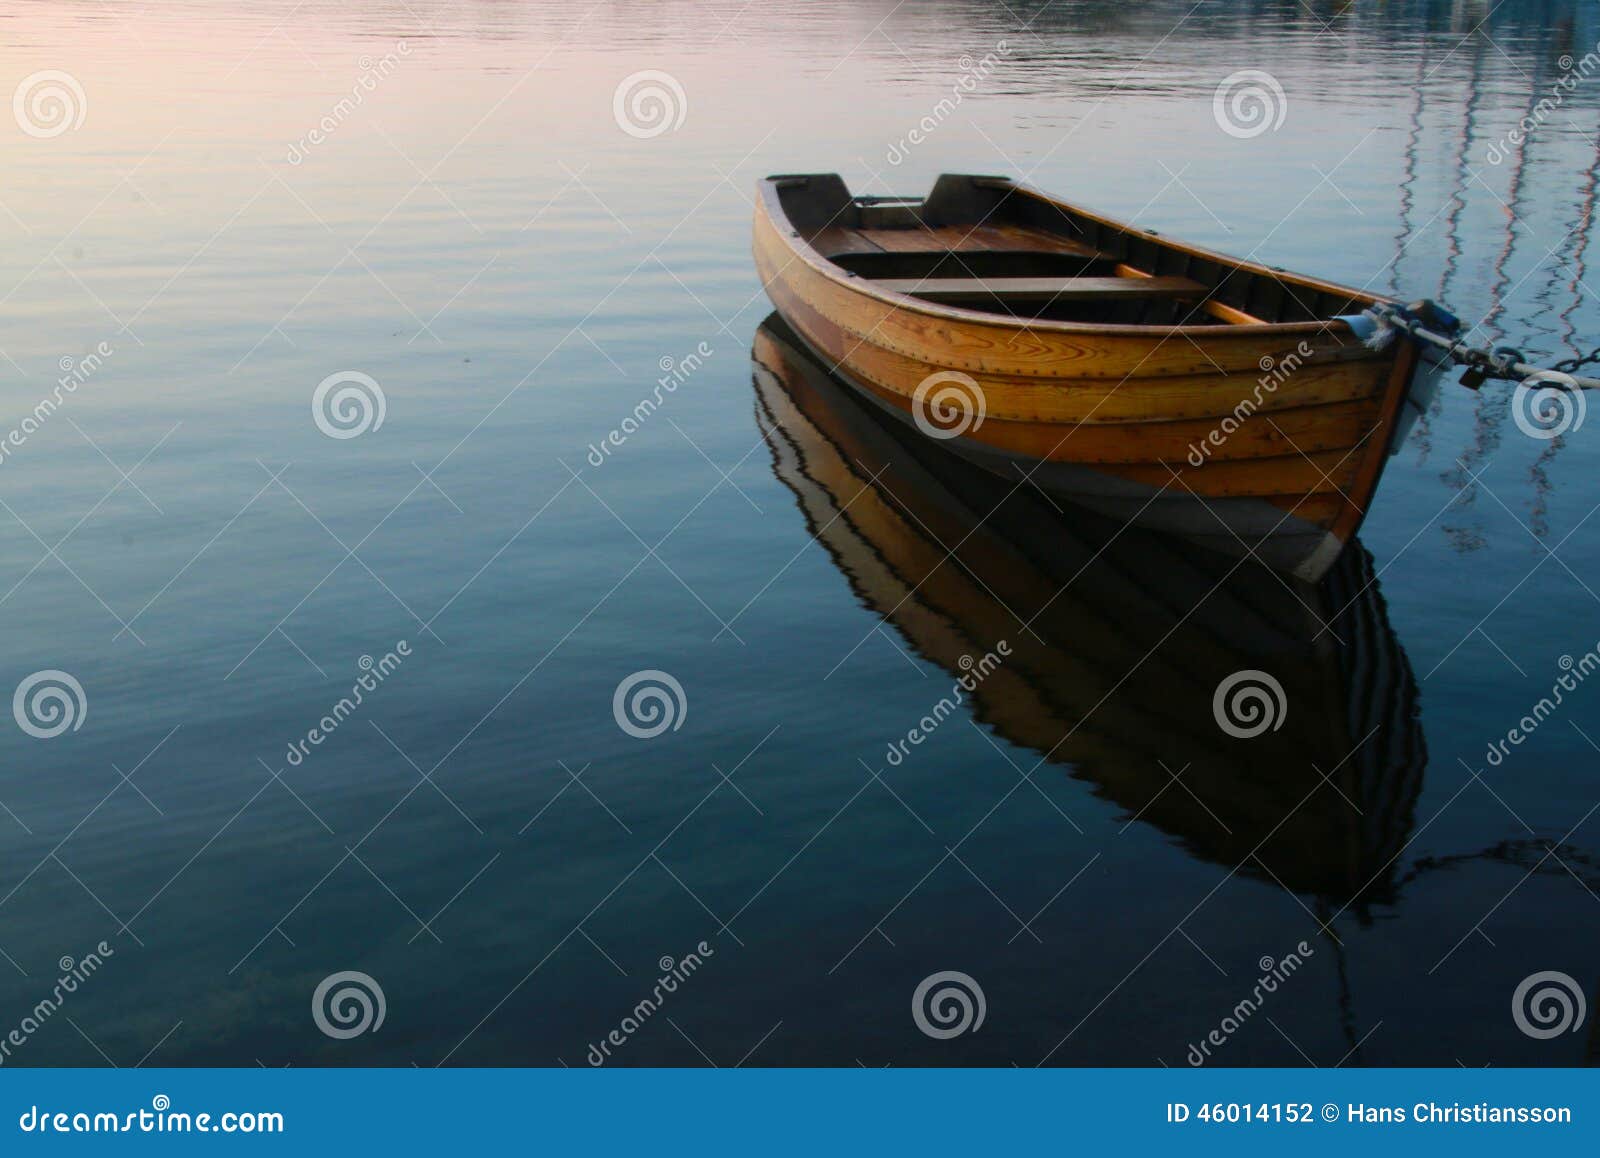 row boat in calm water